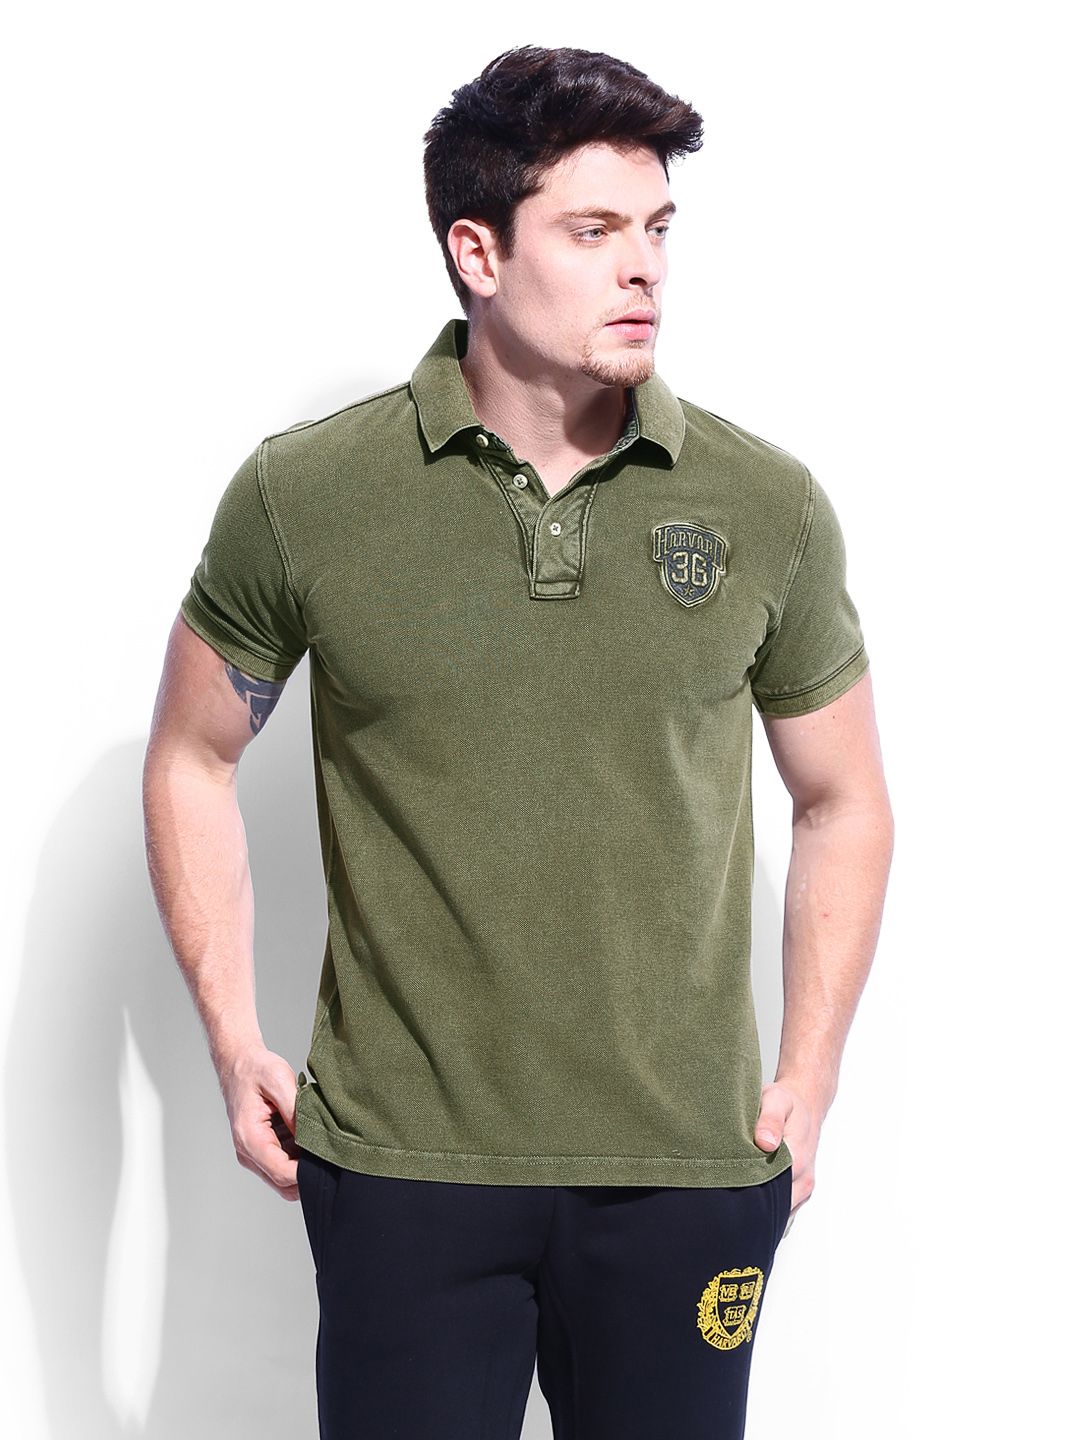 Top t shirt brand in india is the best